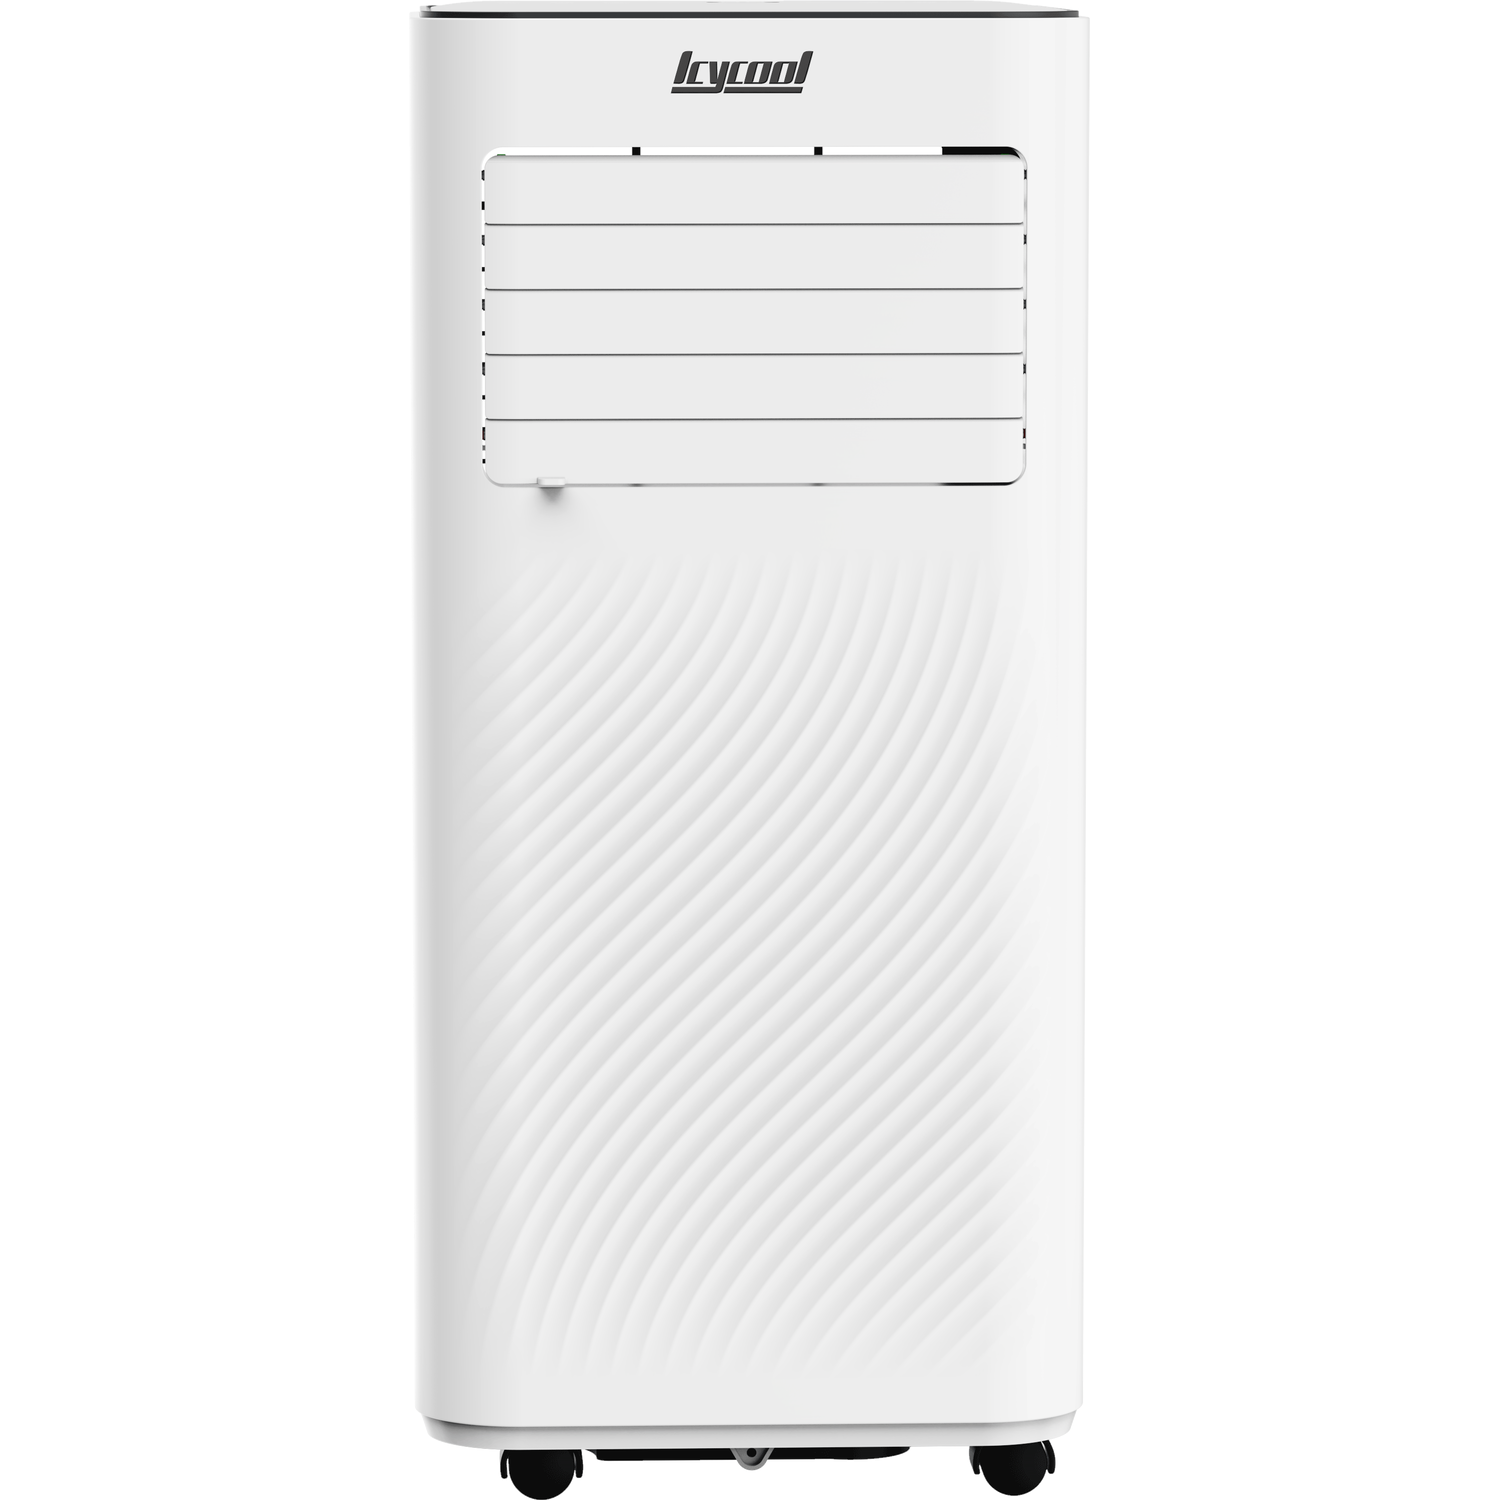 Icycool Portable Air Conditioner White Image 2